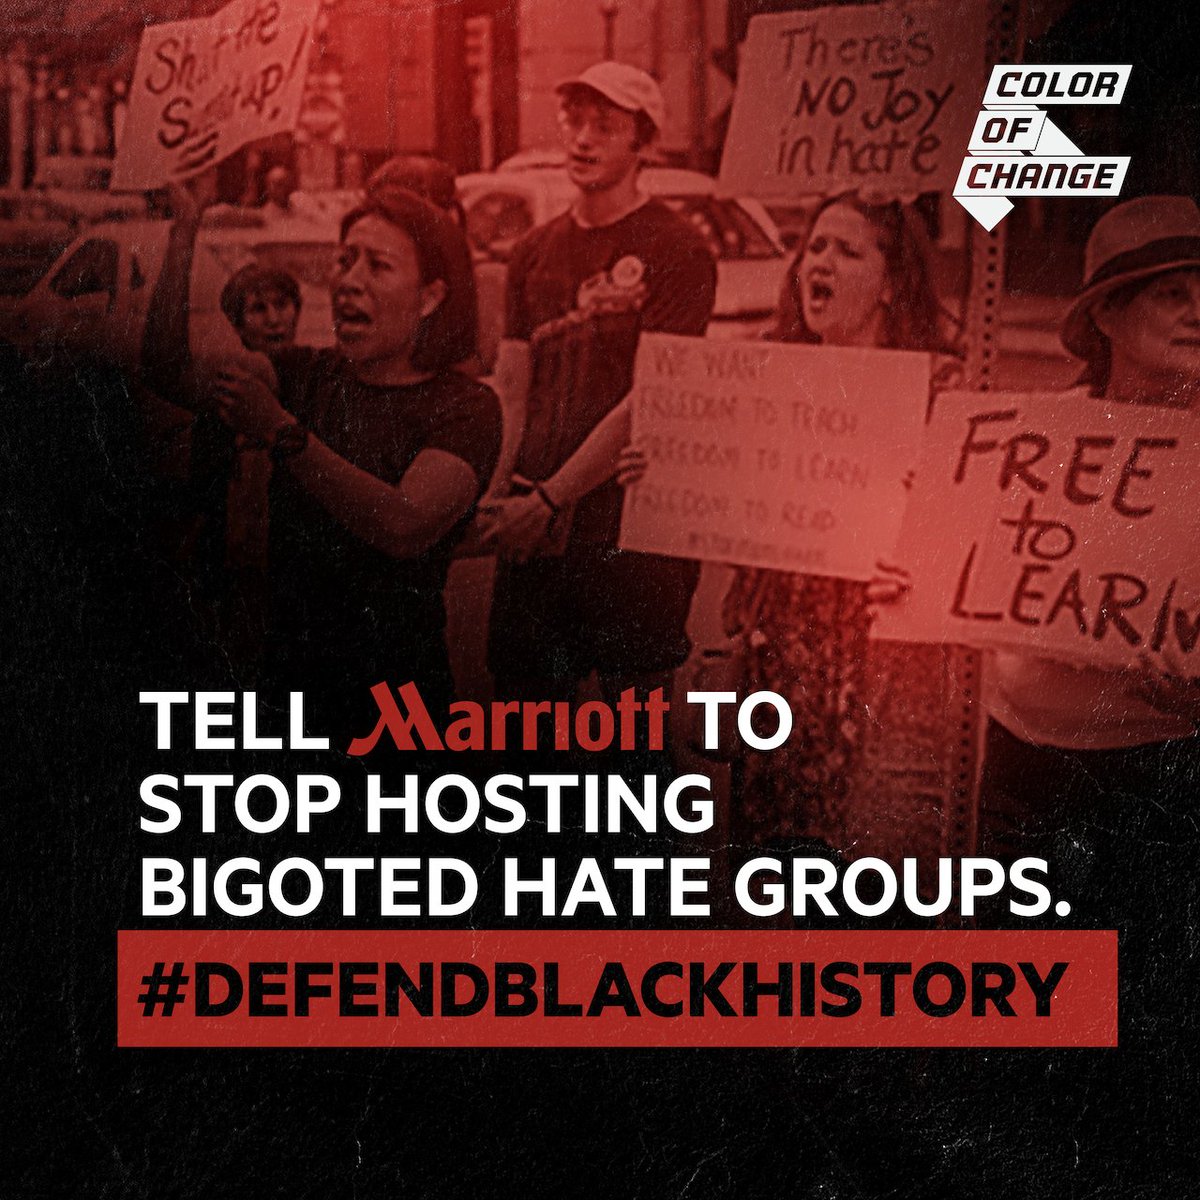 On June 29, the Philadelphia Marriott Downtown will be hosting far-right, extremist group, Moms for Liberty, providing them a space and platform to spew their anti-Black and anti-LGBTQ rhetoric. 🧵